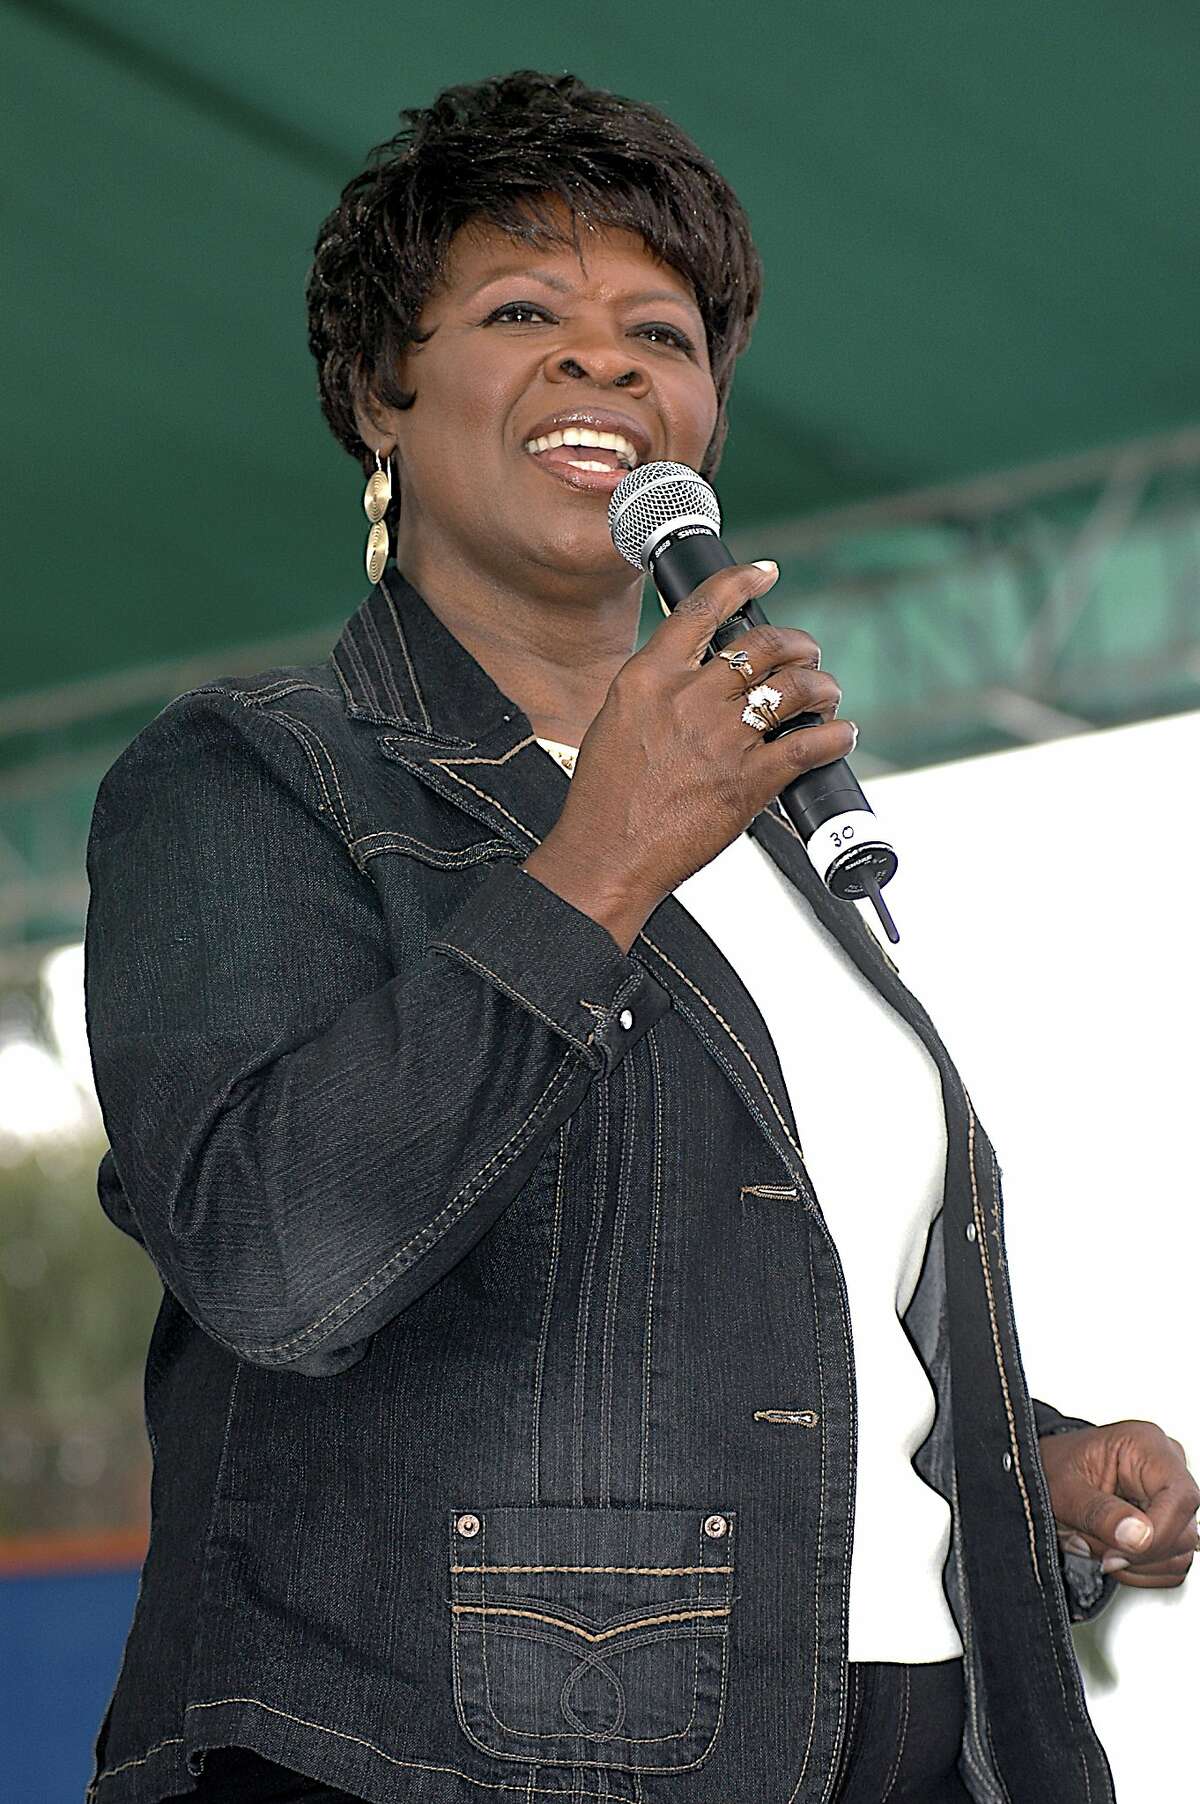 Irma Thomas happy to give the people what they want